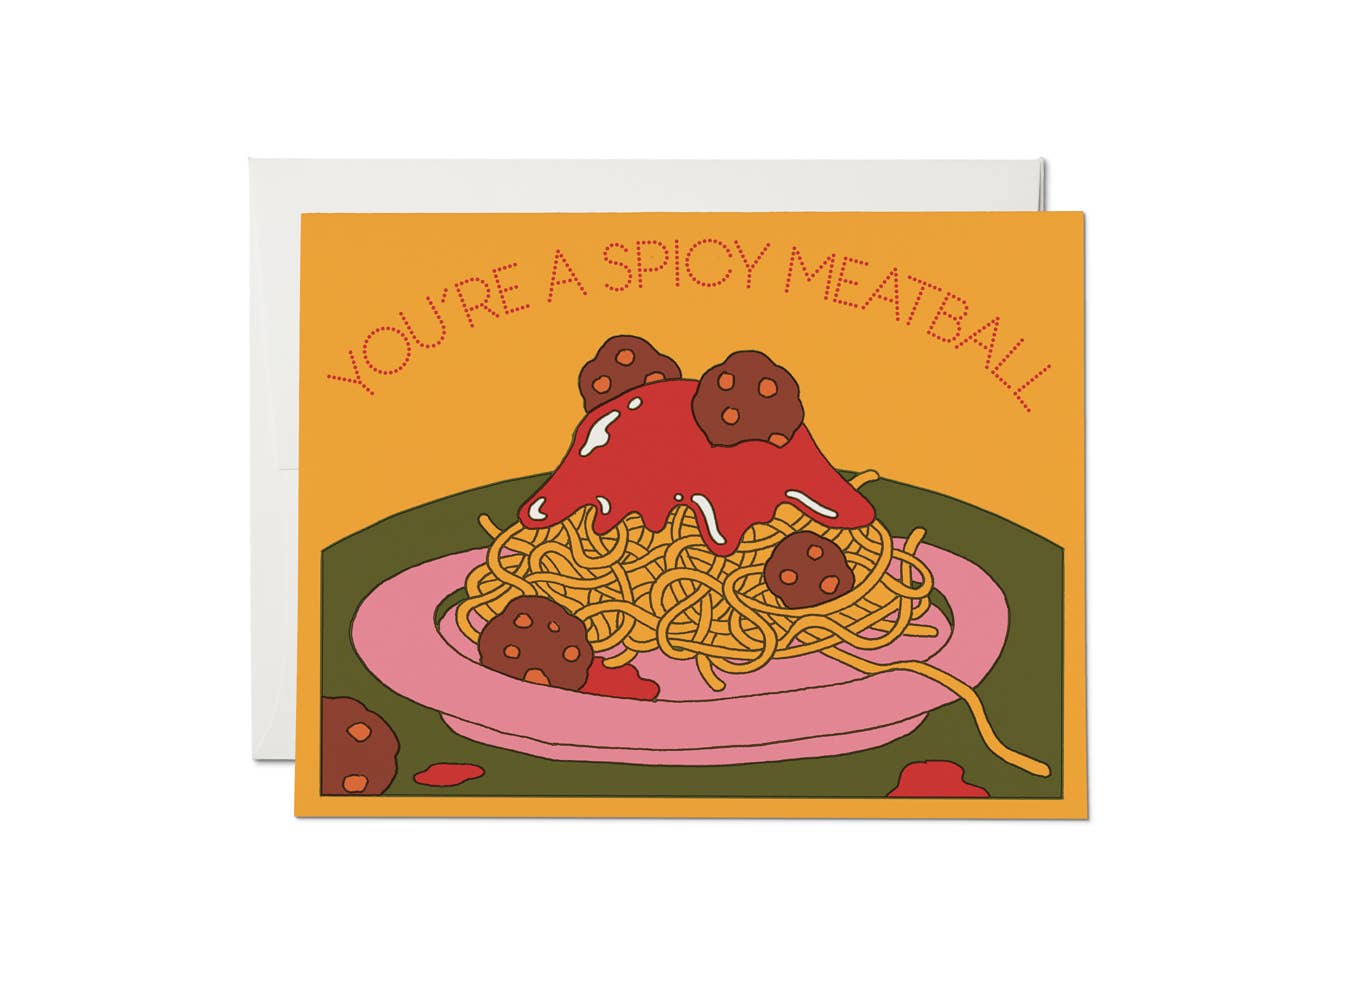 Spicy Meatball friendship greeting card - The Crowd Went Wild